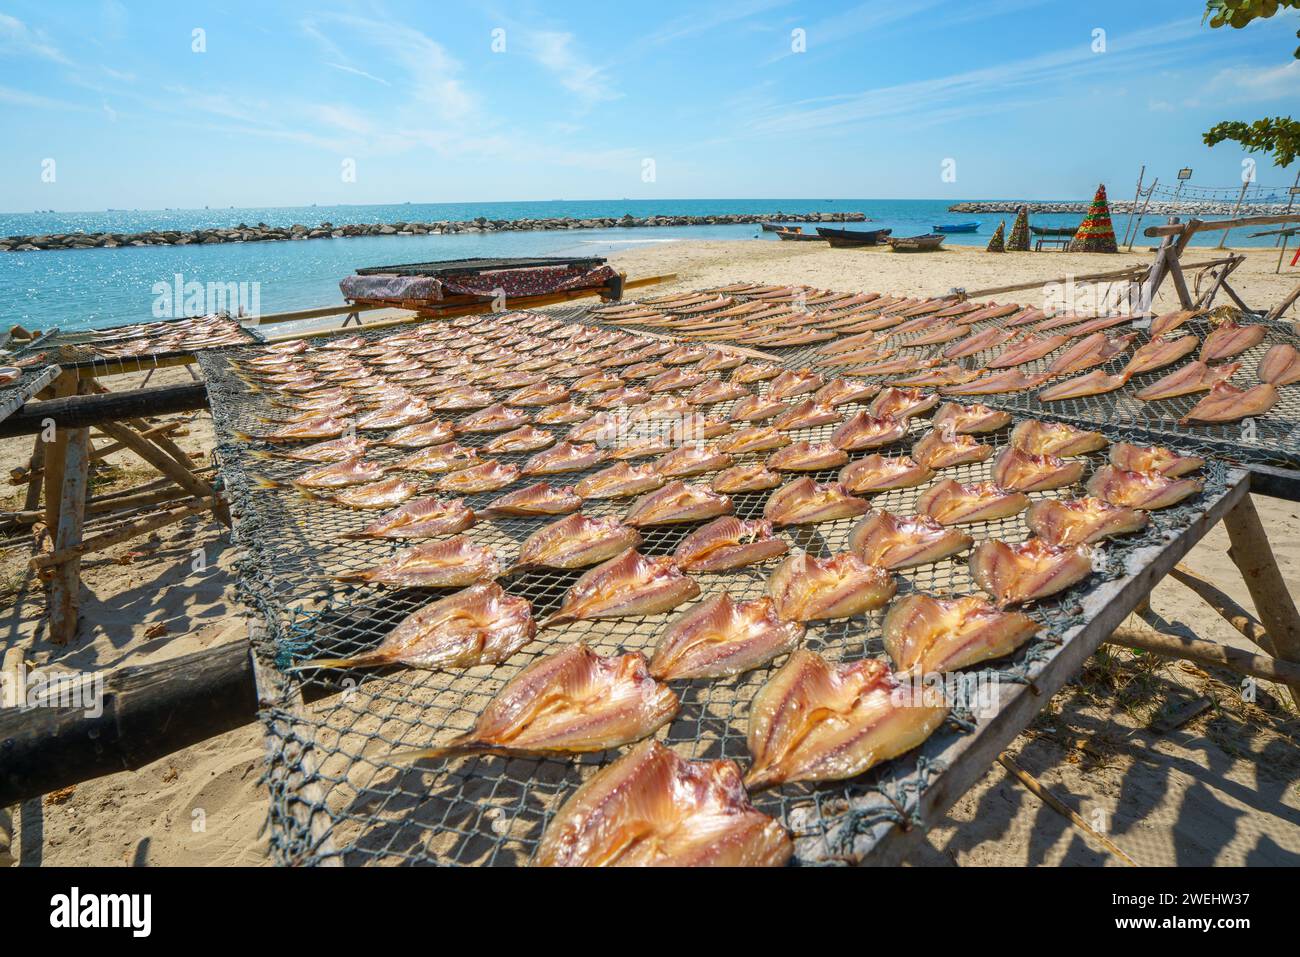 Sun-dried and deep-fried fish in a quaint fishing village brings to life the coastal tradition of transforming freshly caught fish into delectable del Stock Photo